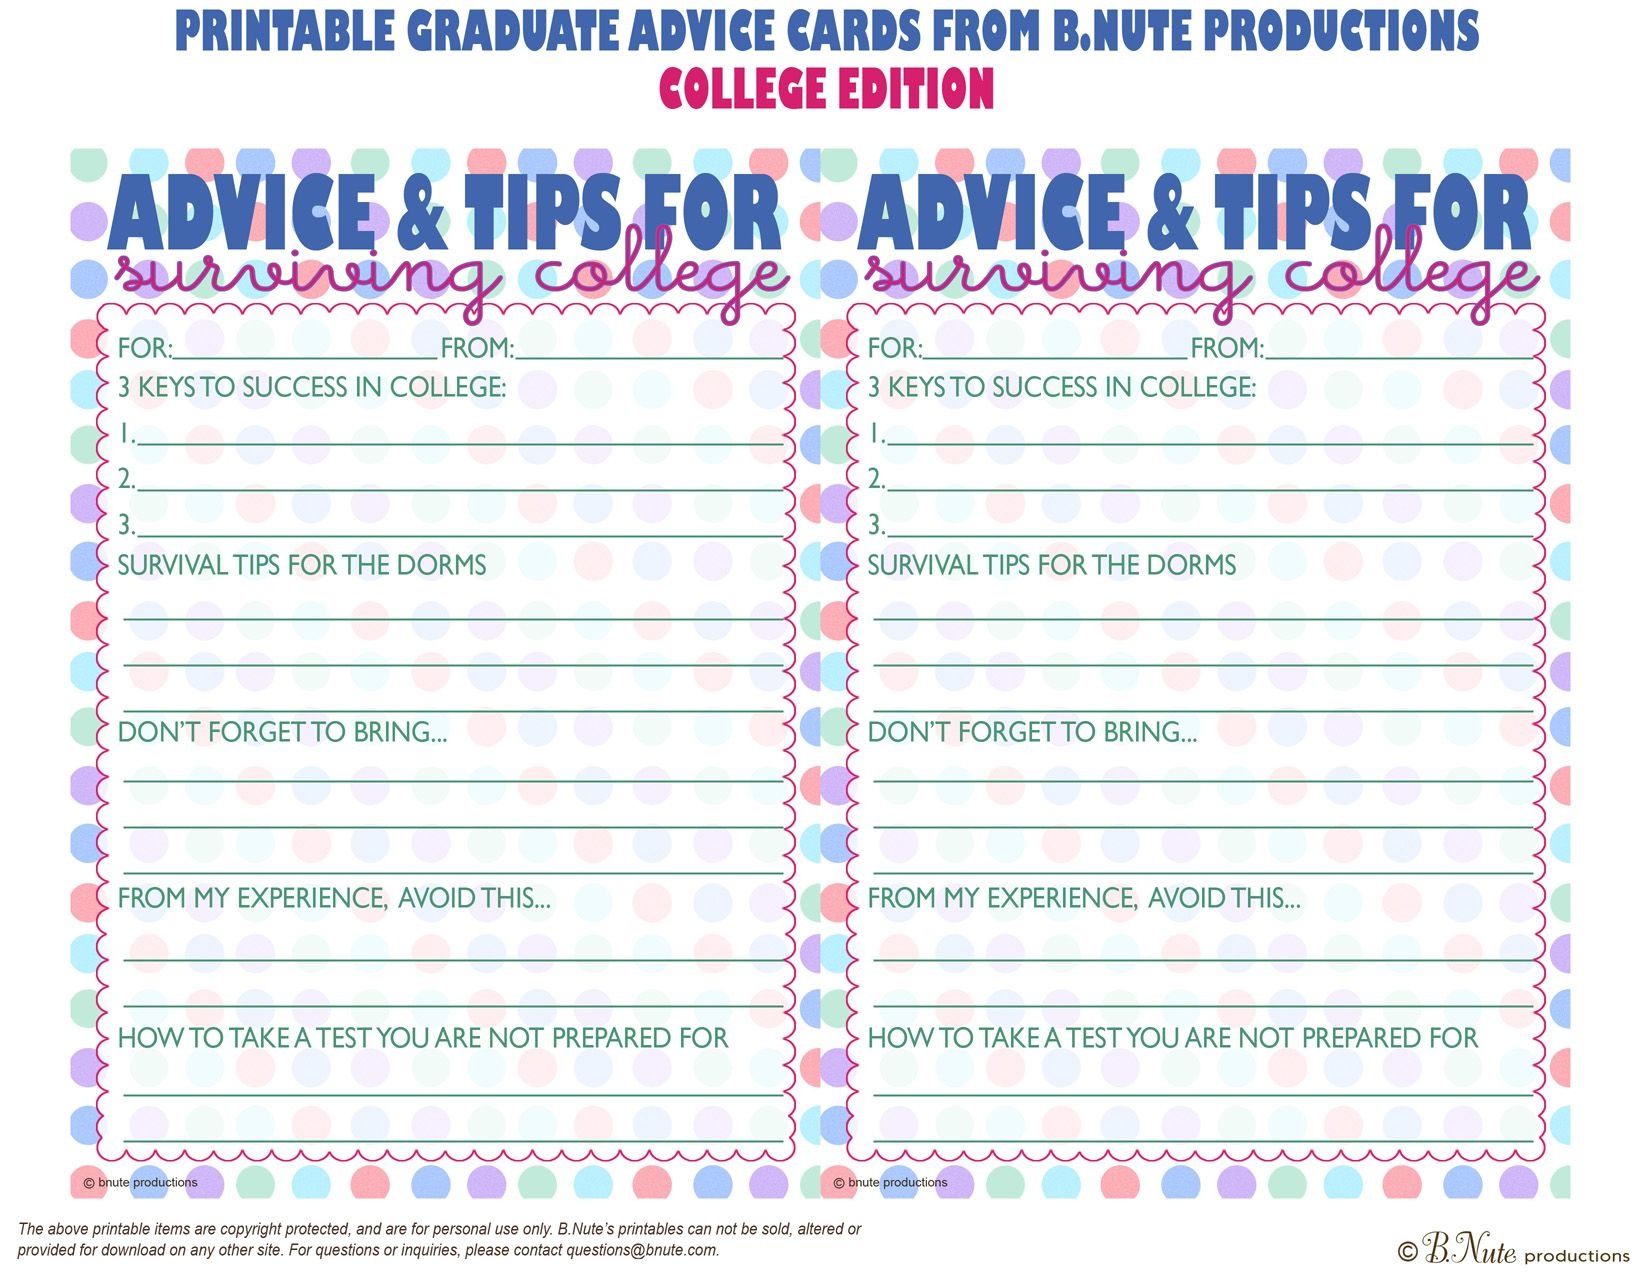 Bnute Productions: Free Printable Graduate Advice Cards - College - Free Printable Graduation Advice Cards